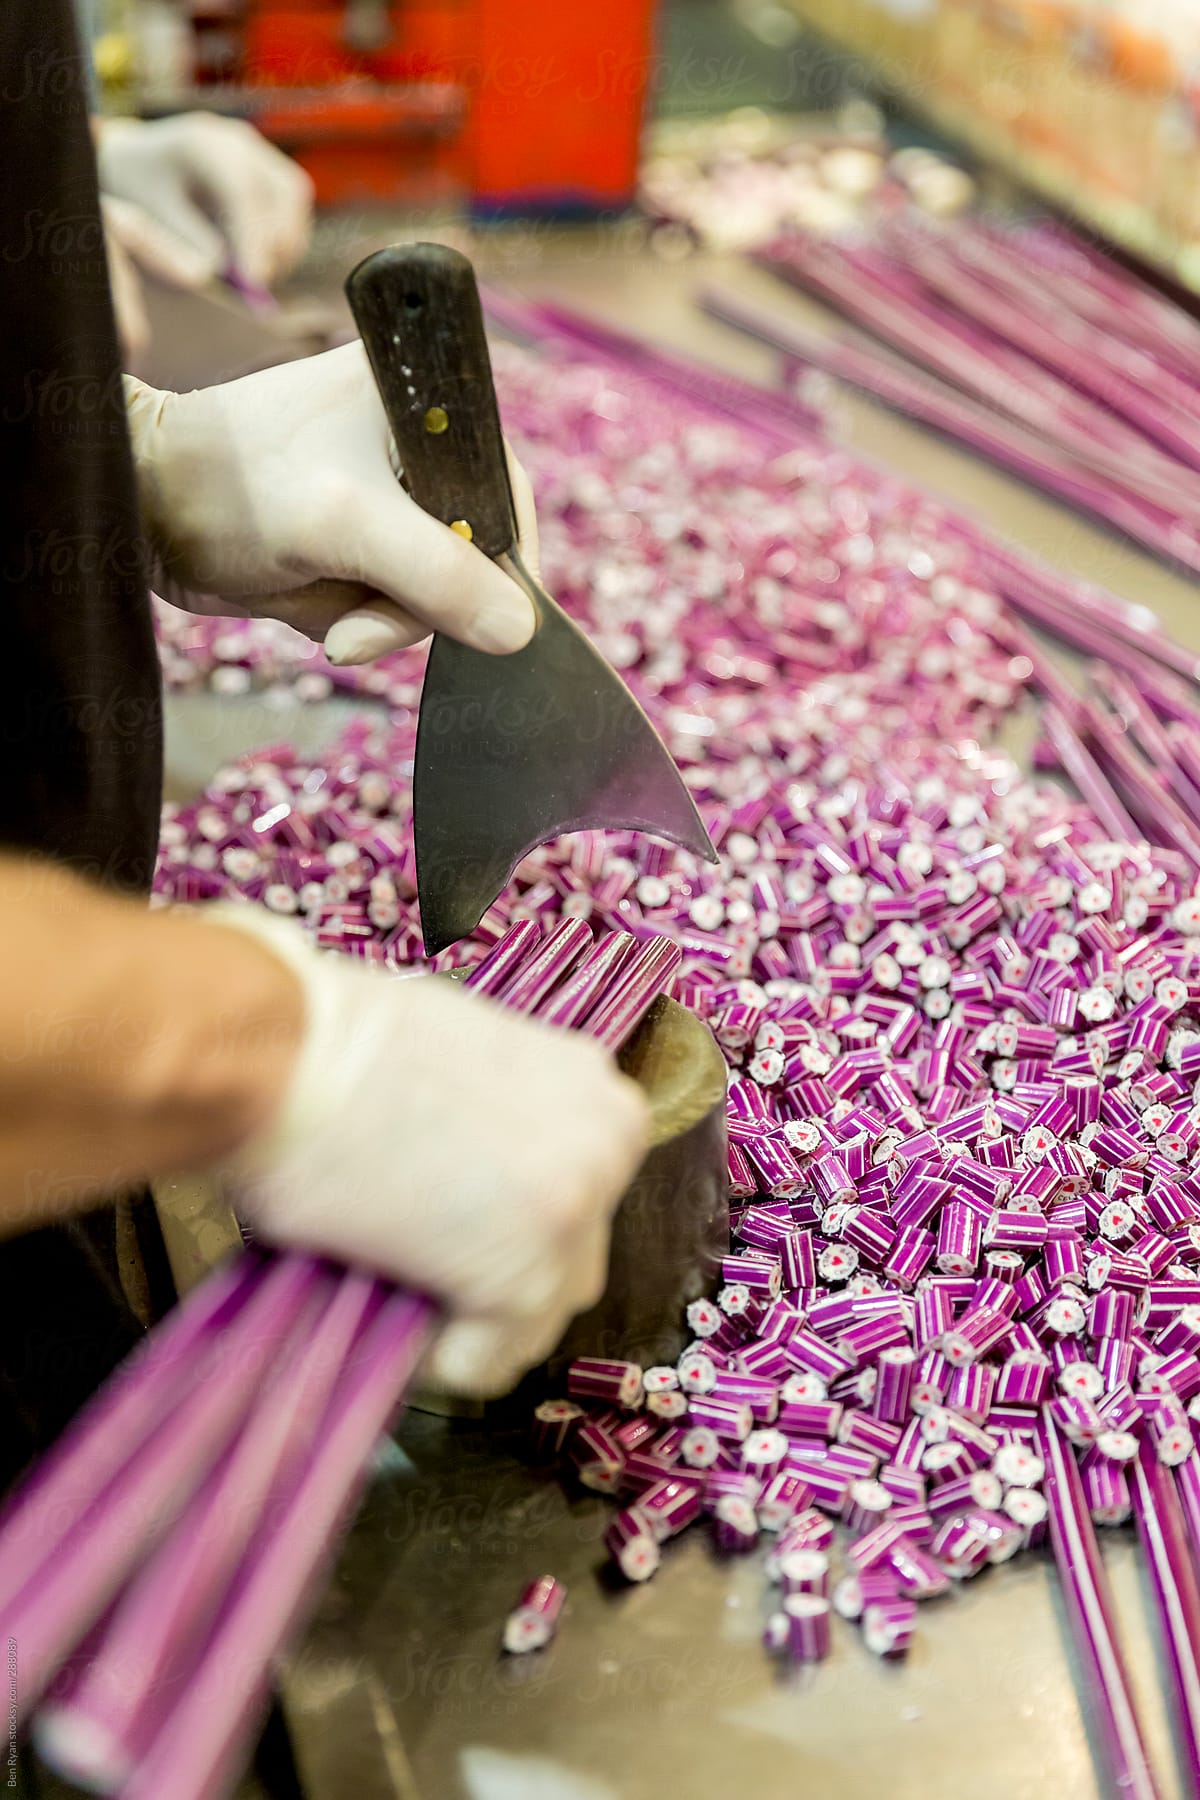 Cutting candy tubes  into final lengths for bagging